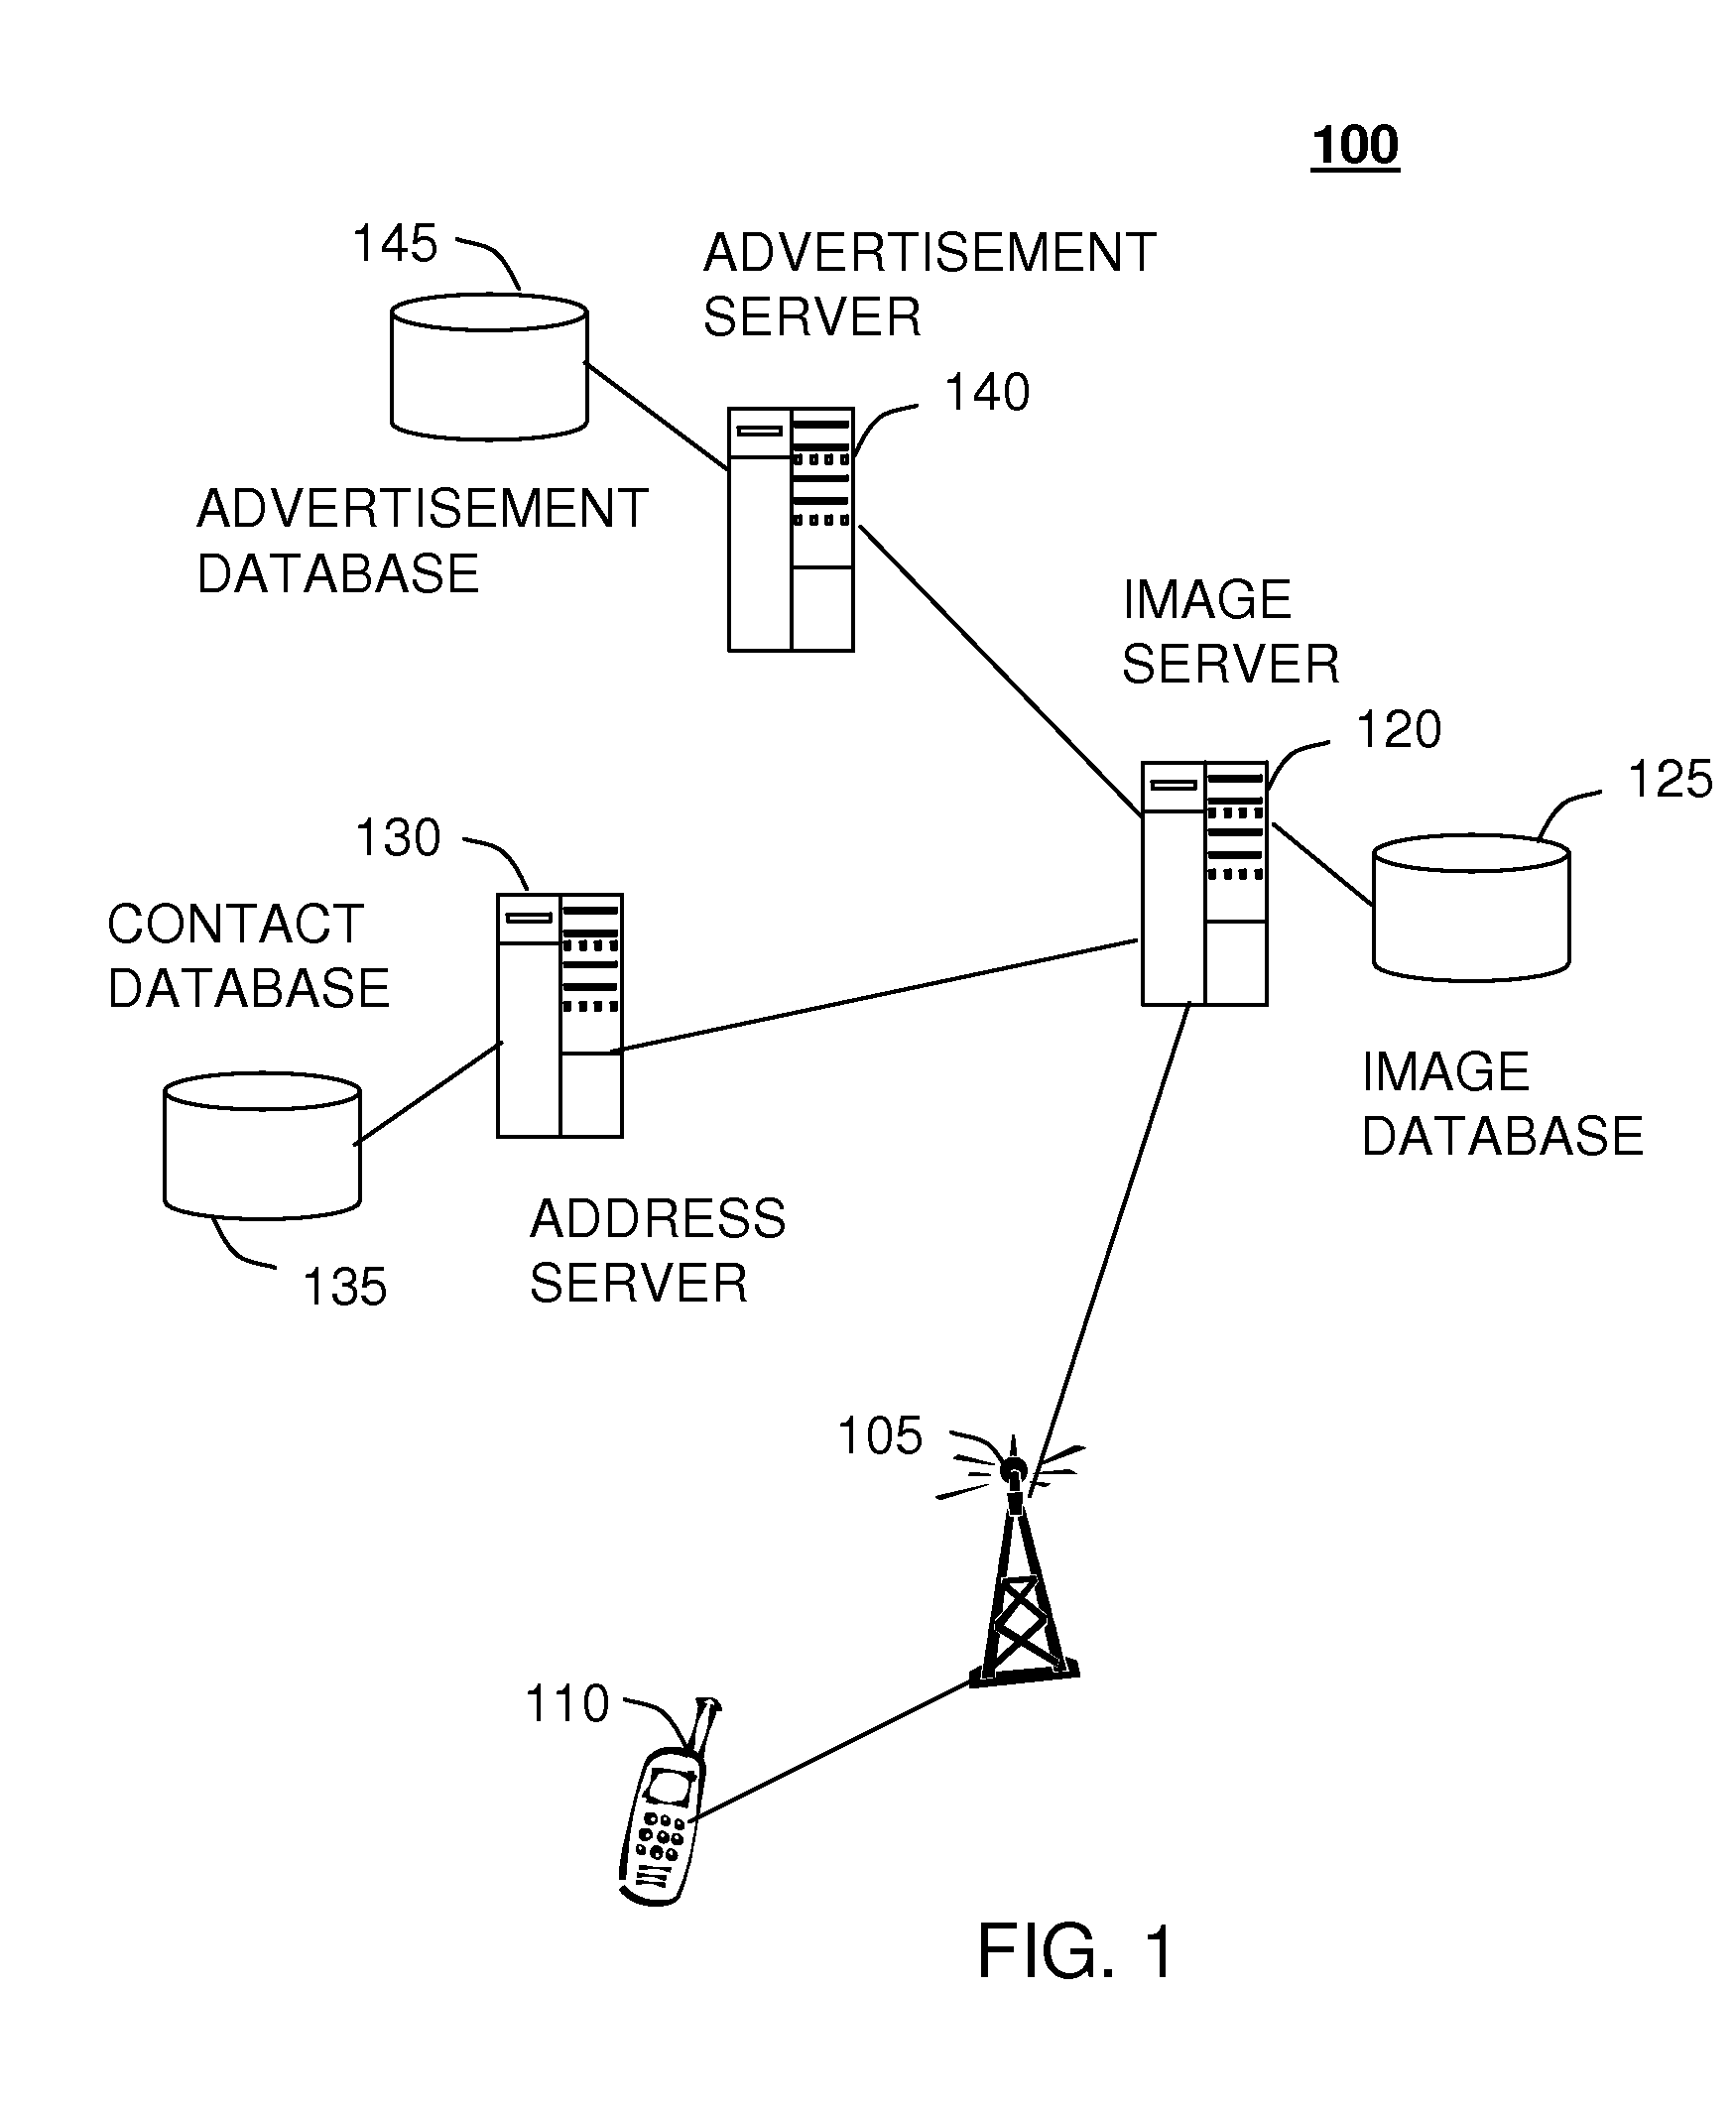 Method and system for providing location-specific image information